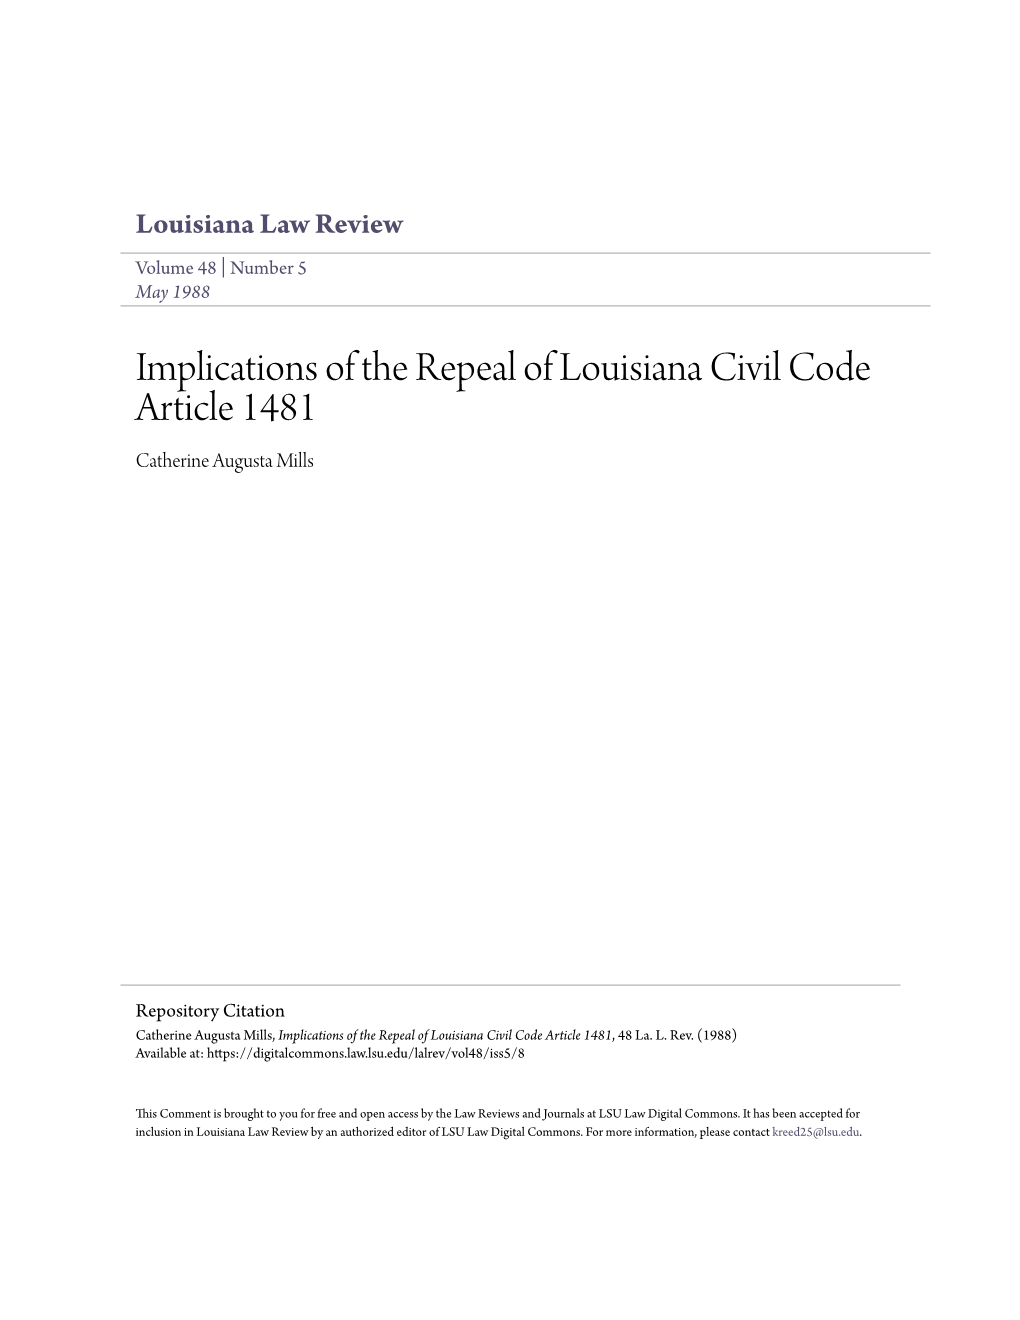 Implications of the Repeal of Louisiana Civil Code Article 1481 Catherine Augusta Mills